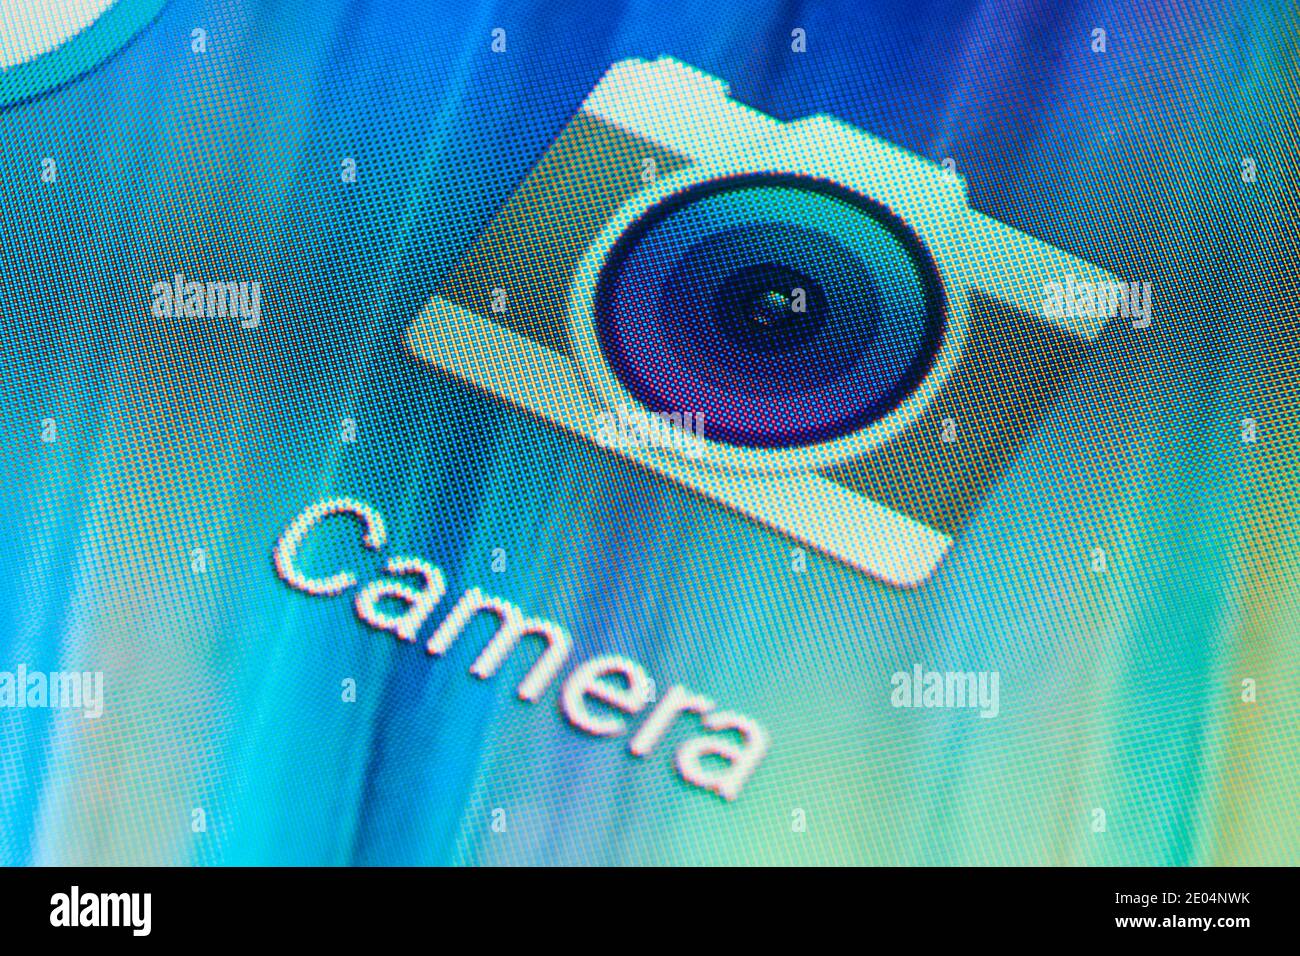 BUENOS AIRES, ARGENTINA - JULY 18, 2019: Macro shot of Camera mobile application icon on Android phone screen. Common camera app for mobile devices. Stock Photo